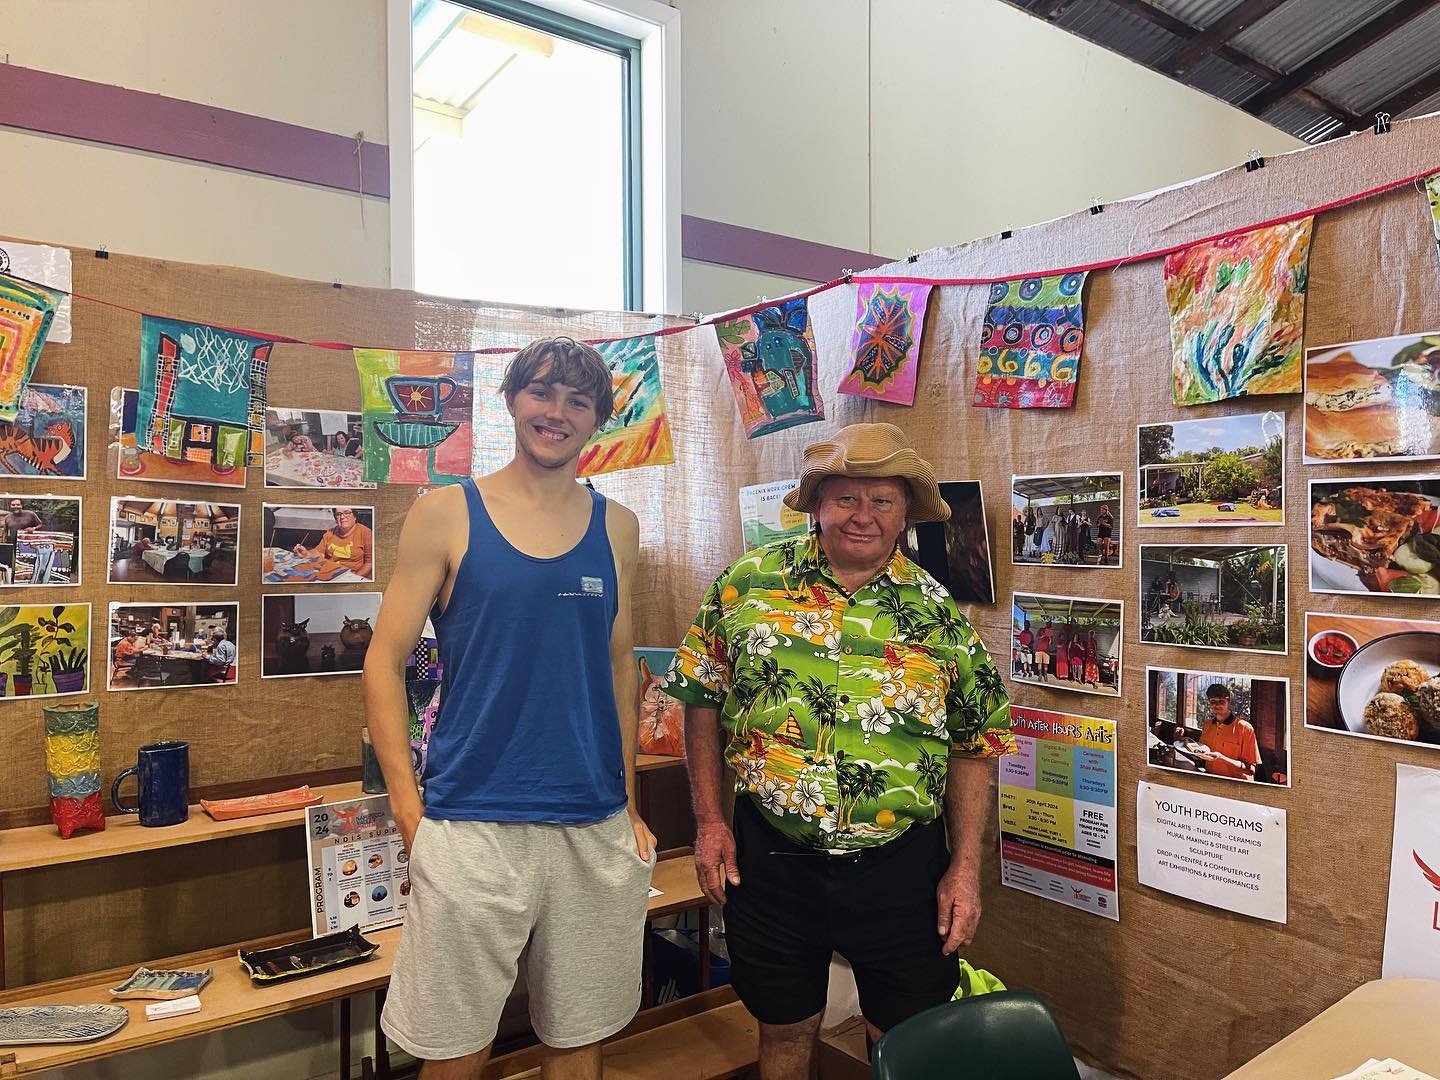 Great weekend at Macksville show! 

Phoenix artists totally killed it, winning prizes in all categories. We are so proud of everyone! 

Edward Barnes - 1st prize painting &amp; 3rd prize in ceramics 
Paul Gibson- 1st prize ceramics and highly commend